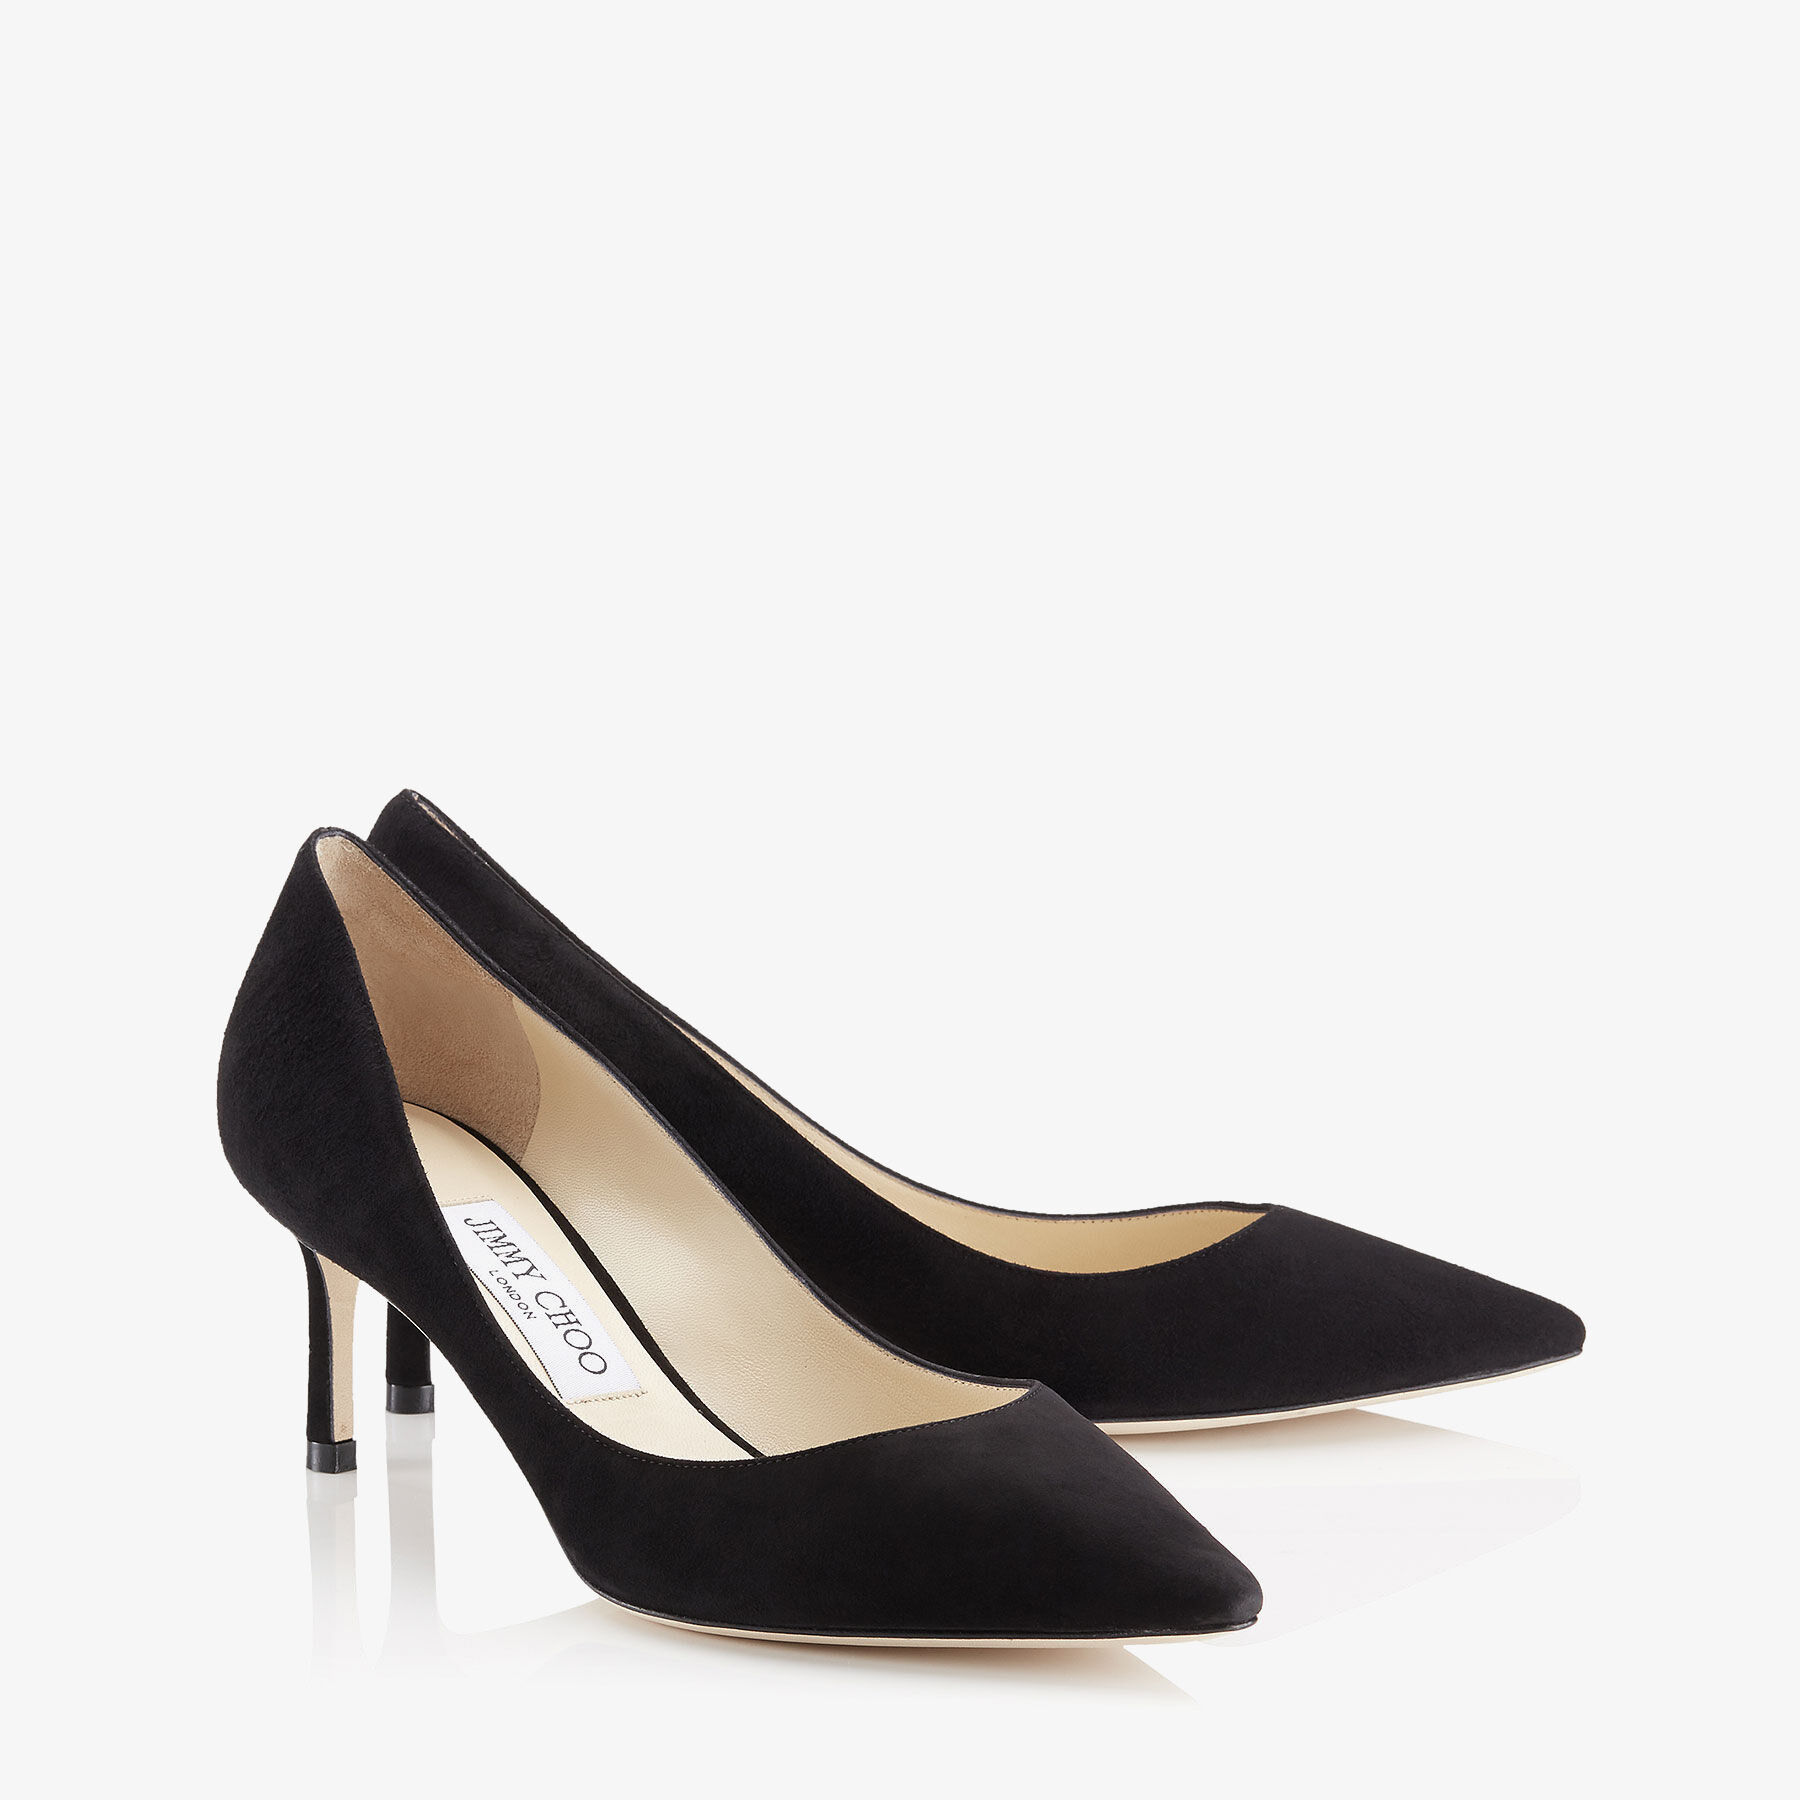 Black Suede Pointy Toe Pumps, Romy 60, Cruise 17